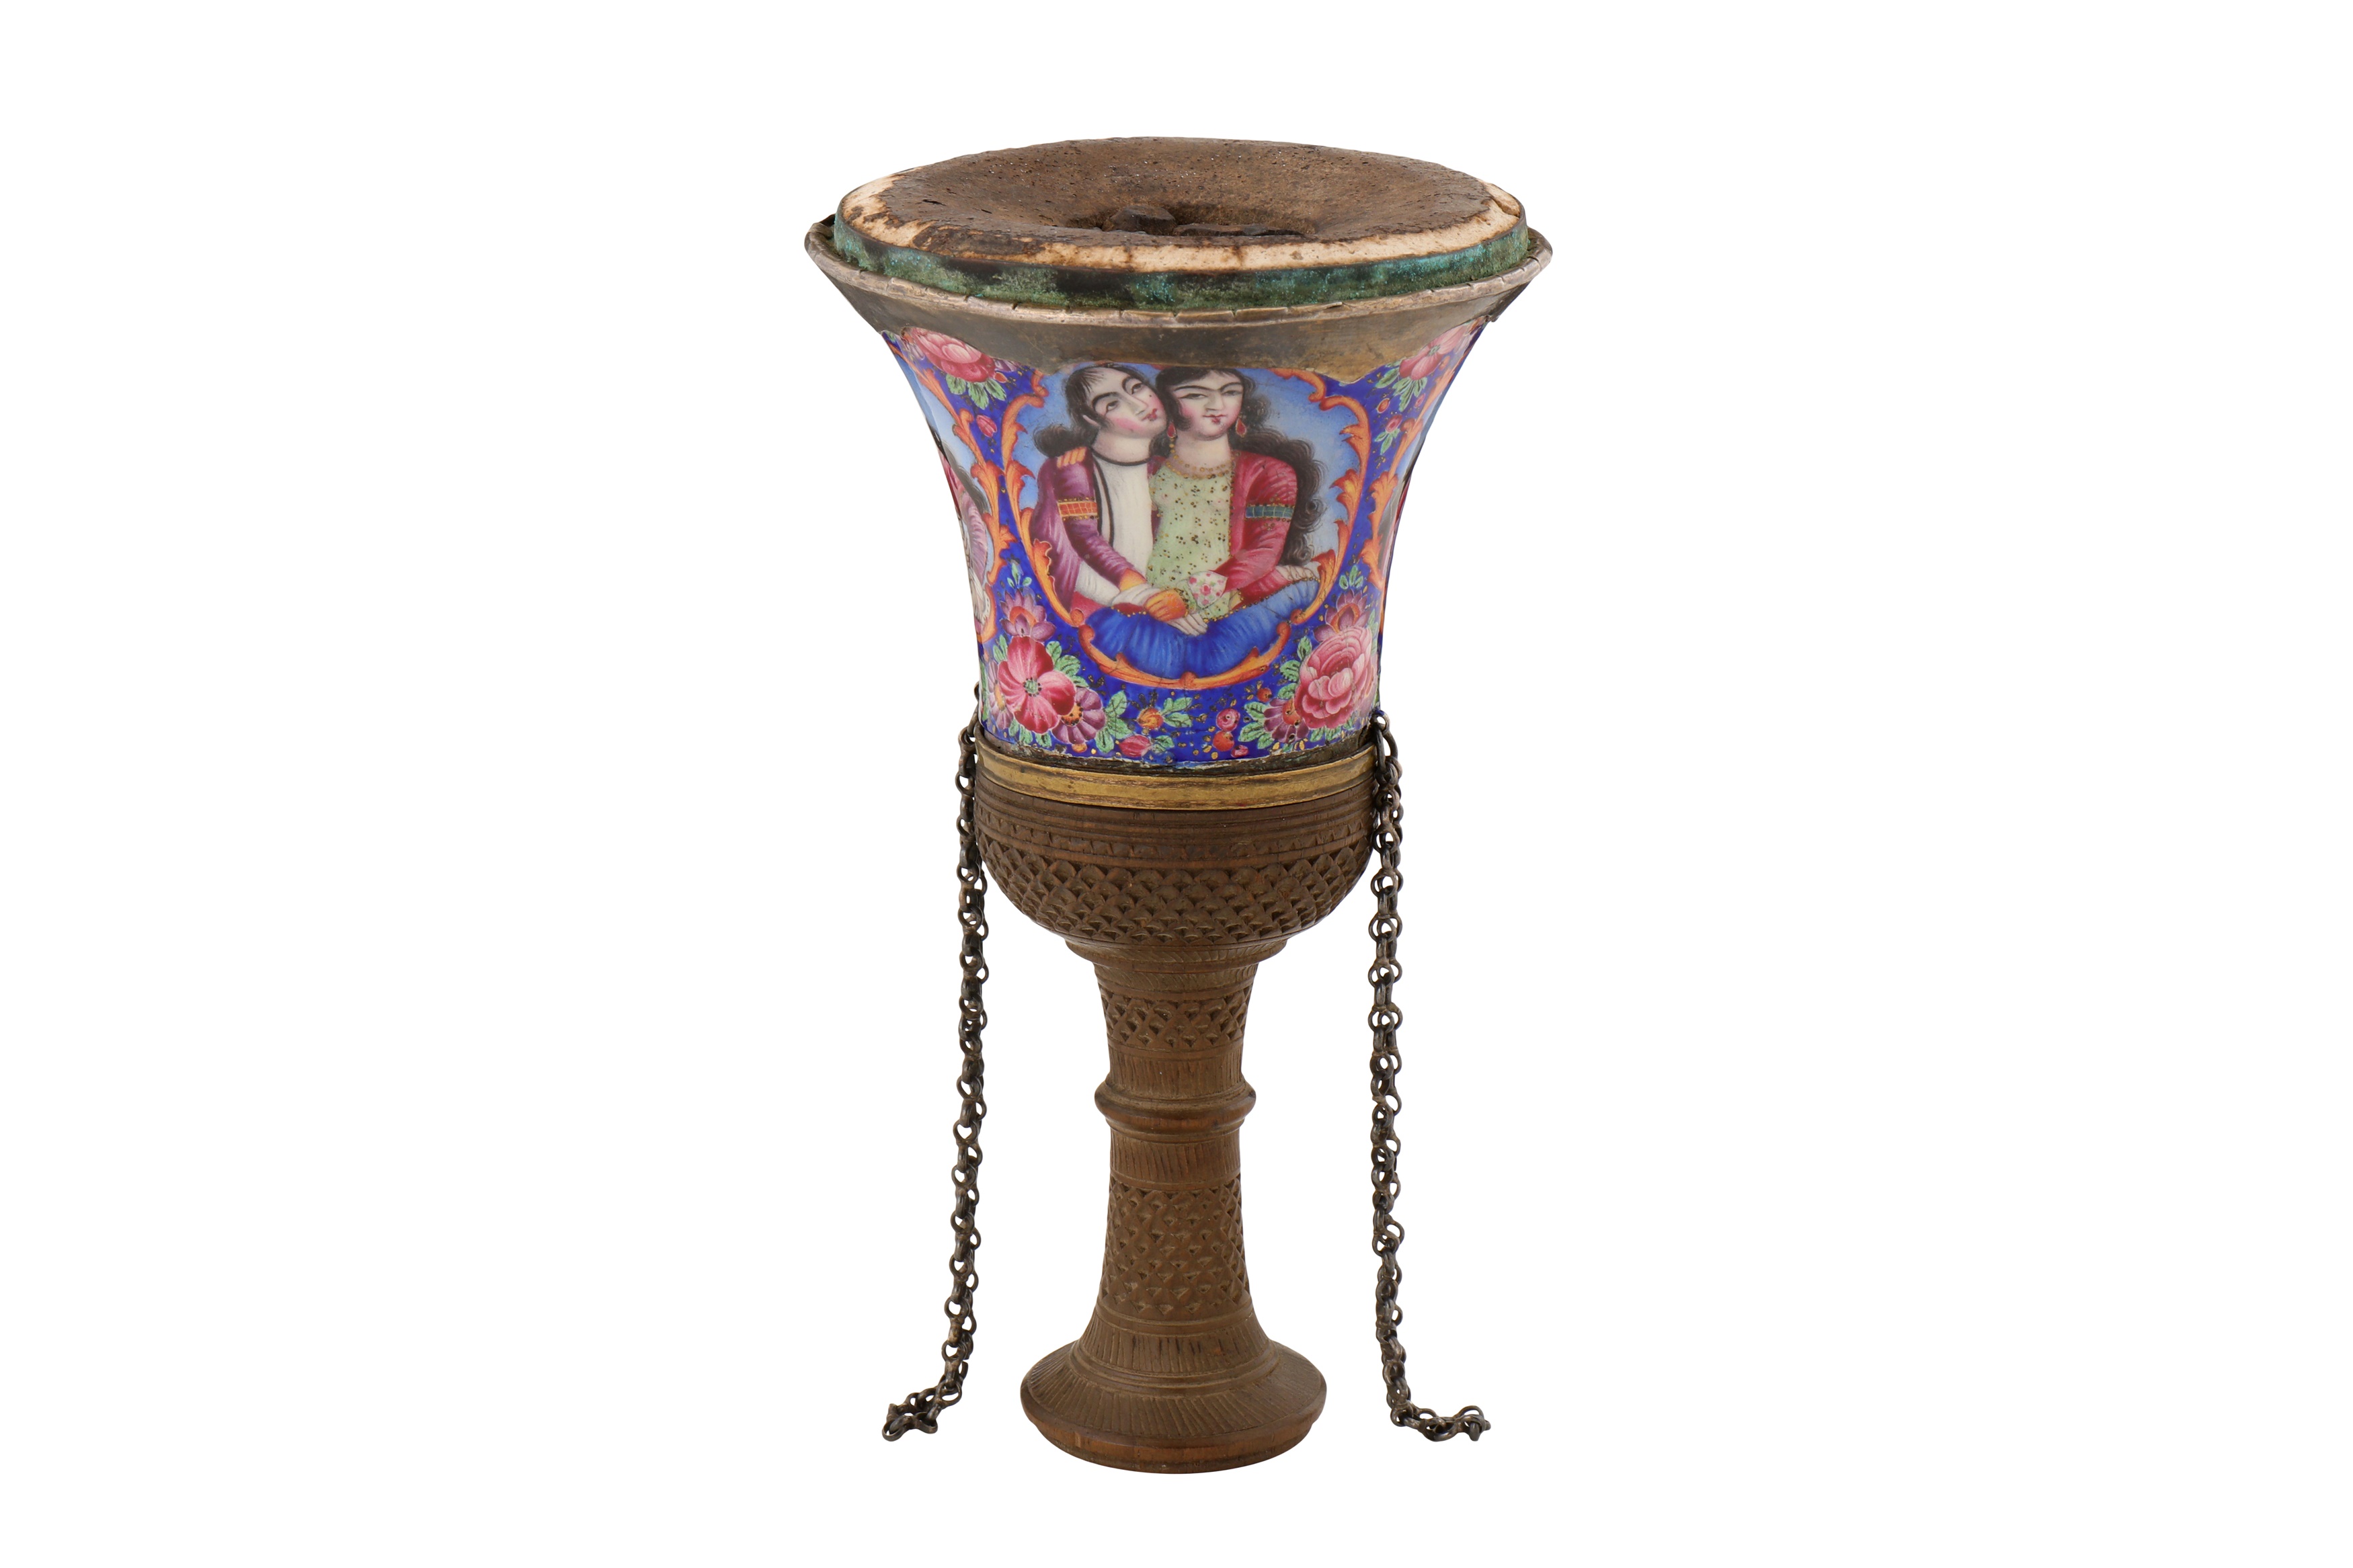 A 19TH CENTURY PERSIAN QAJAR ENAMELLED COPPER GHALIAN CUP - Image 4 of 4